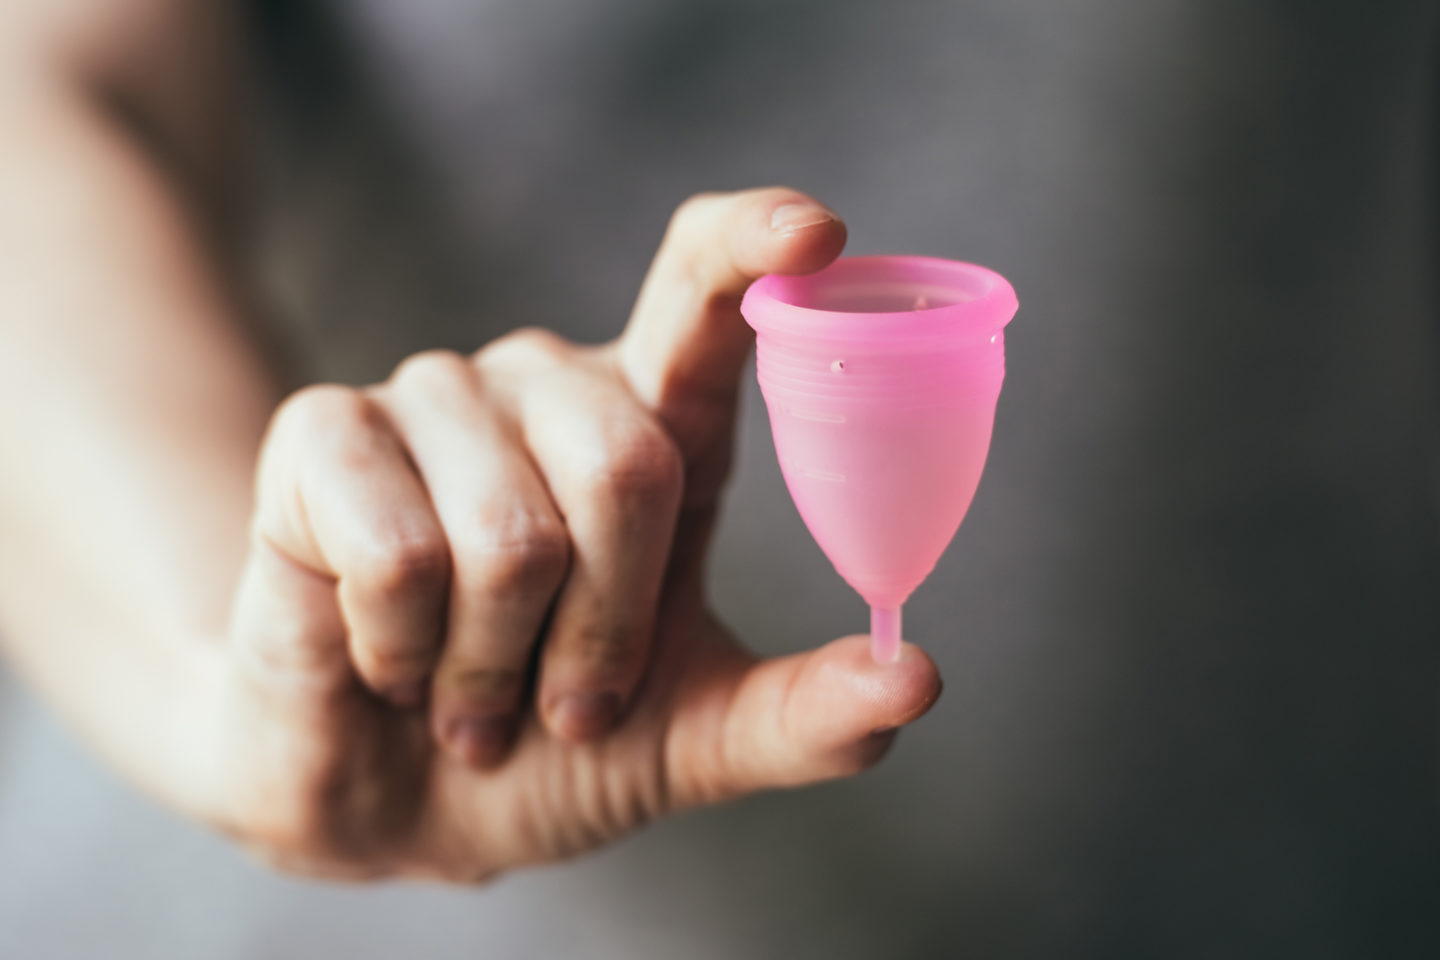 Menstrual Cups That Are Made In South Korea Can Be Sold In The US, But Not In South Korea